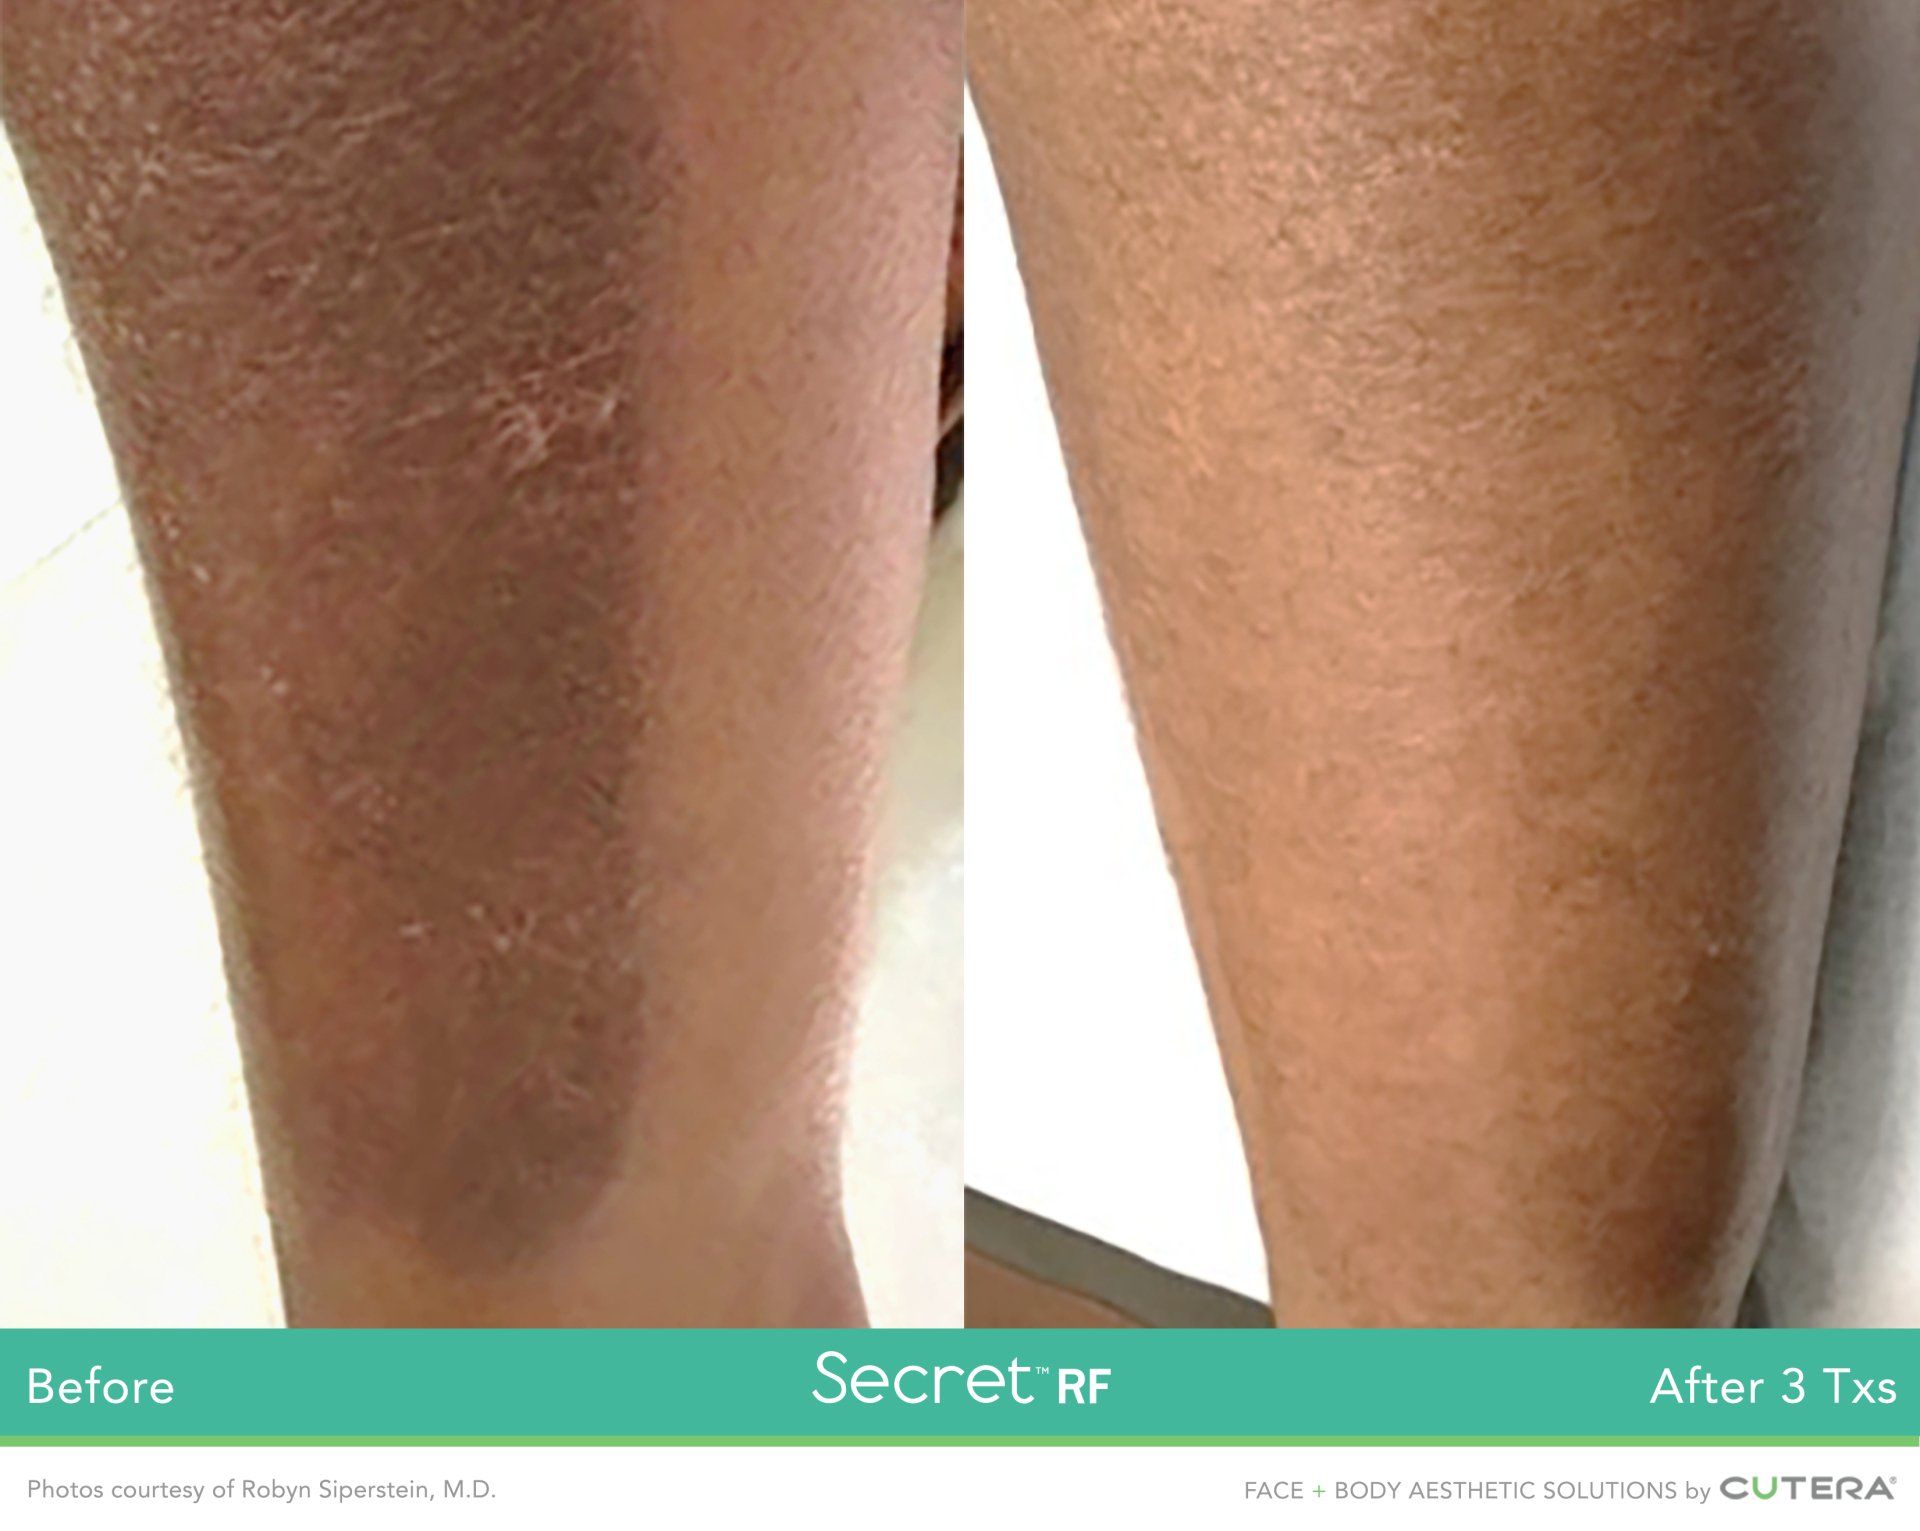 A before and after photo of a person 's leg.